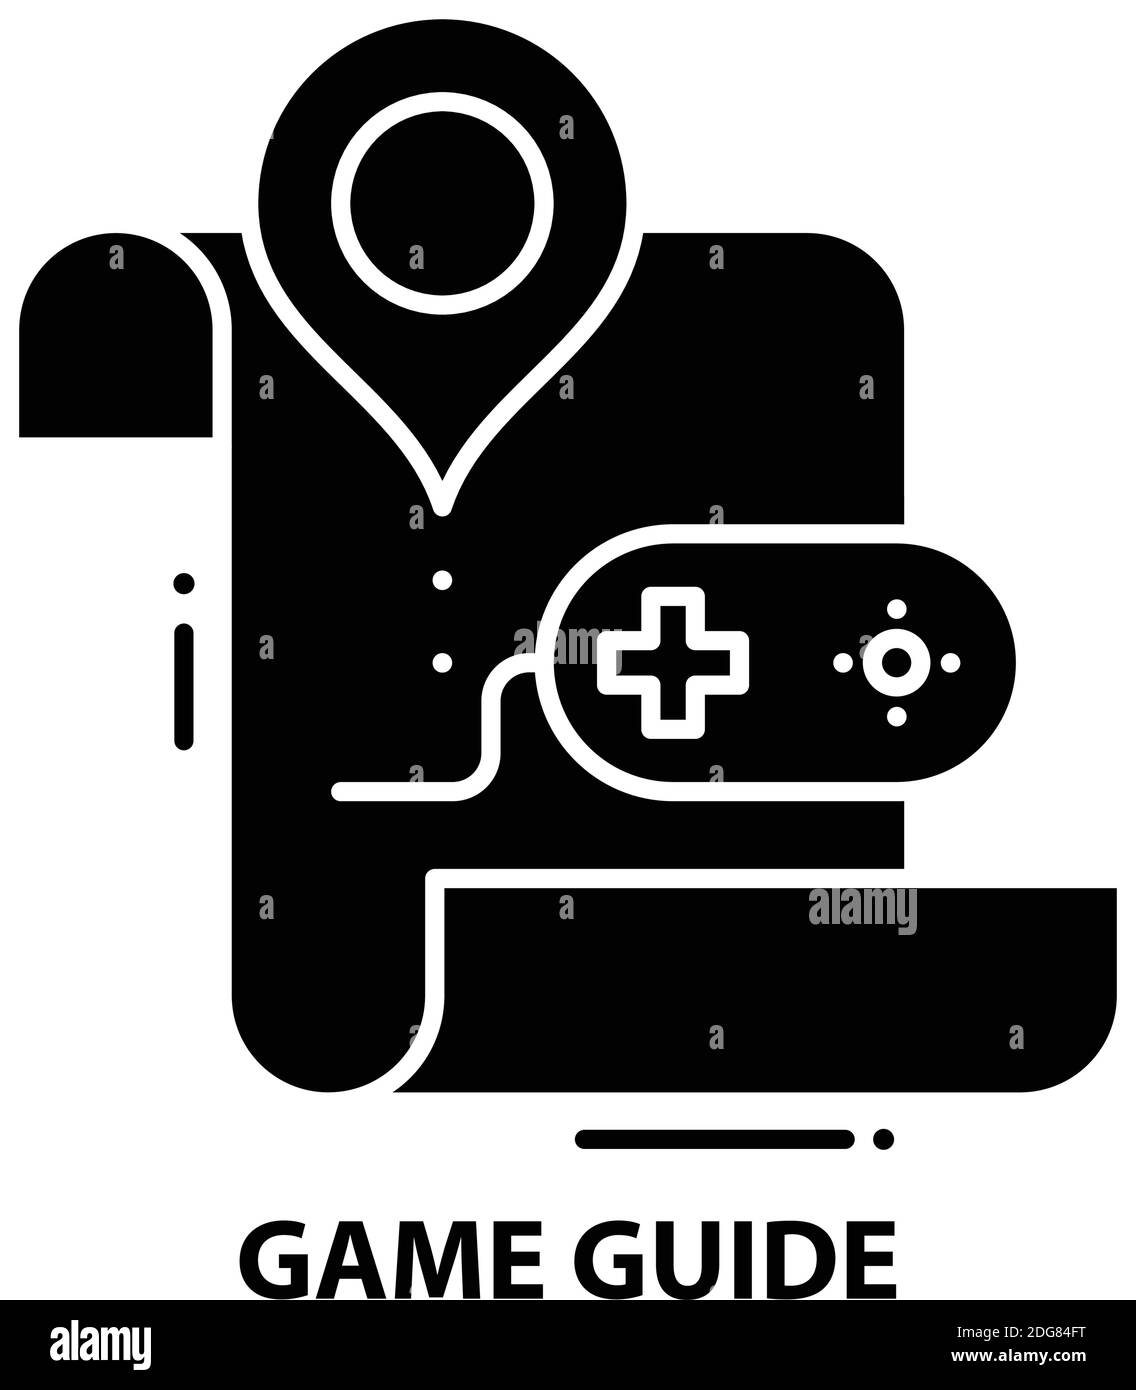 game guide icon, black vector sign with editable strokes, concept illustration Stock Vector